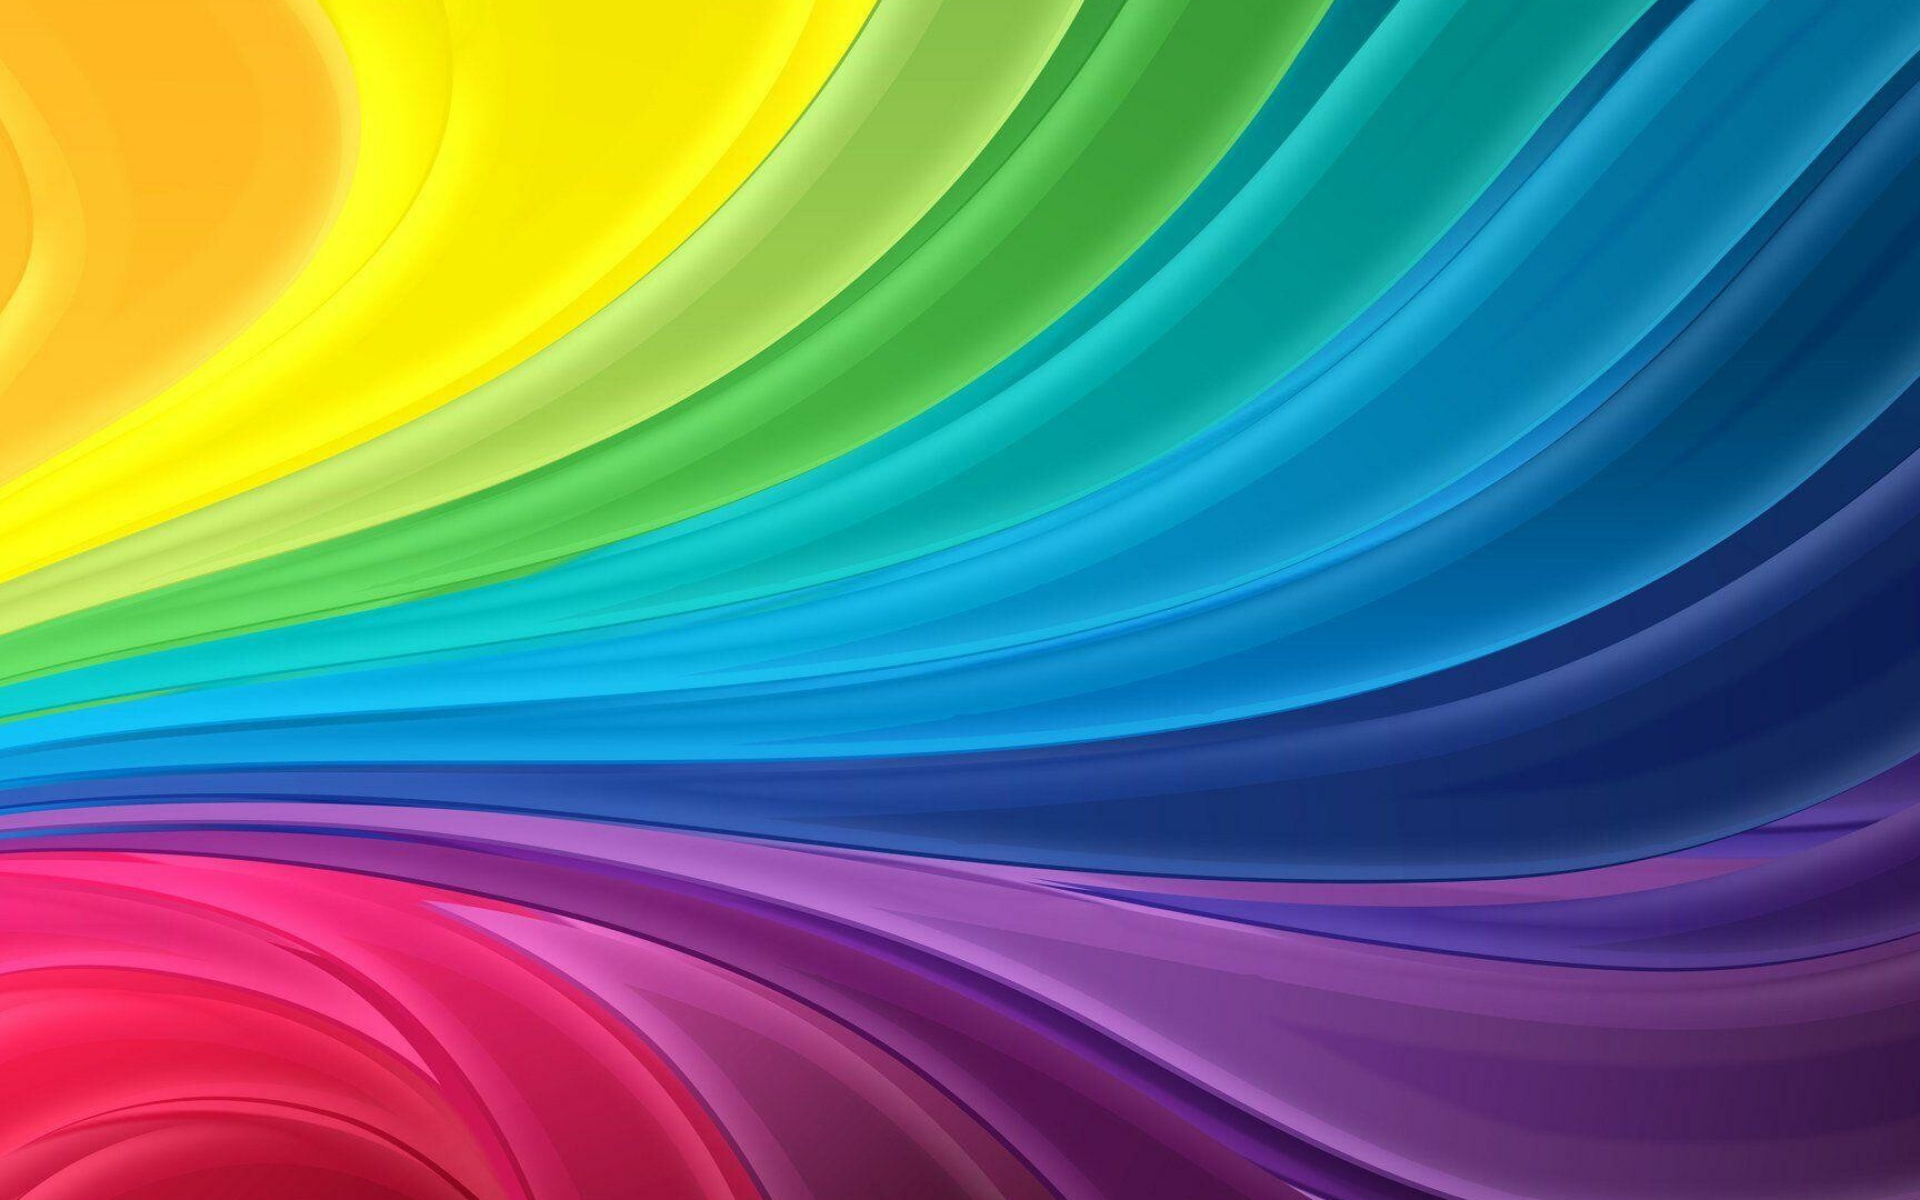 Rainbow Colors: Art design that comes in various types, sizes, and shapes. 1920x1200 HD Wallpaper.